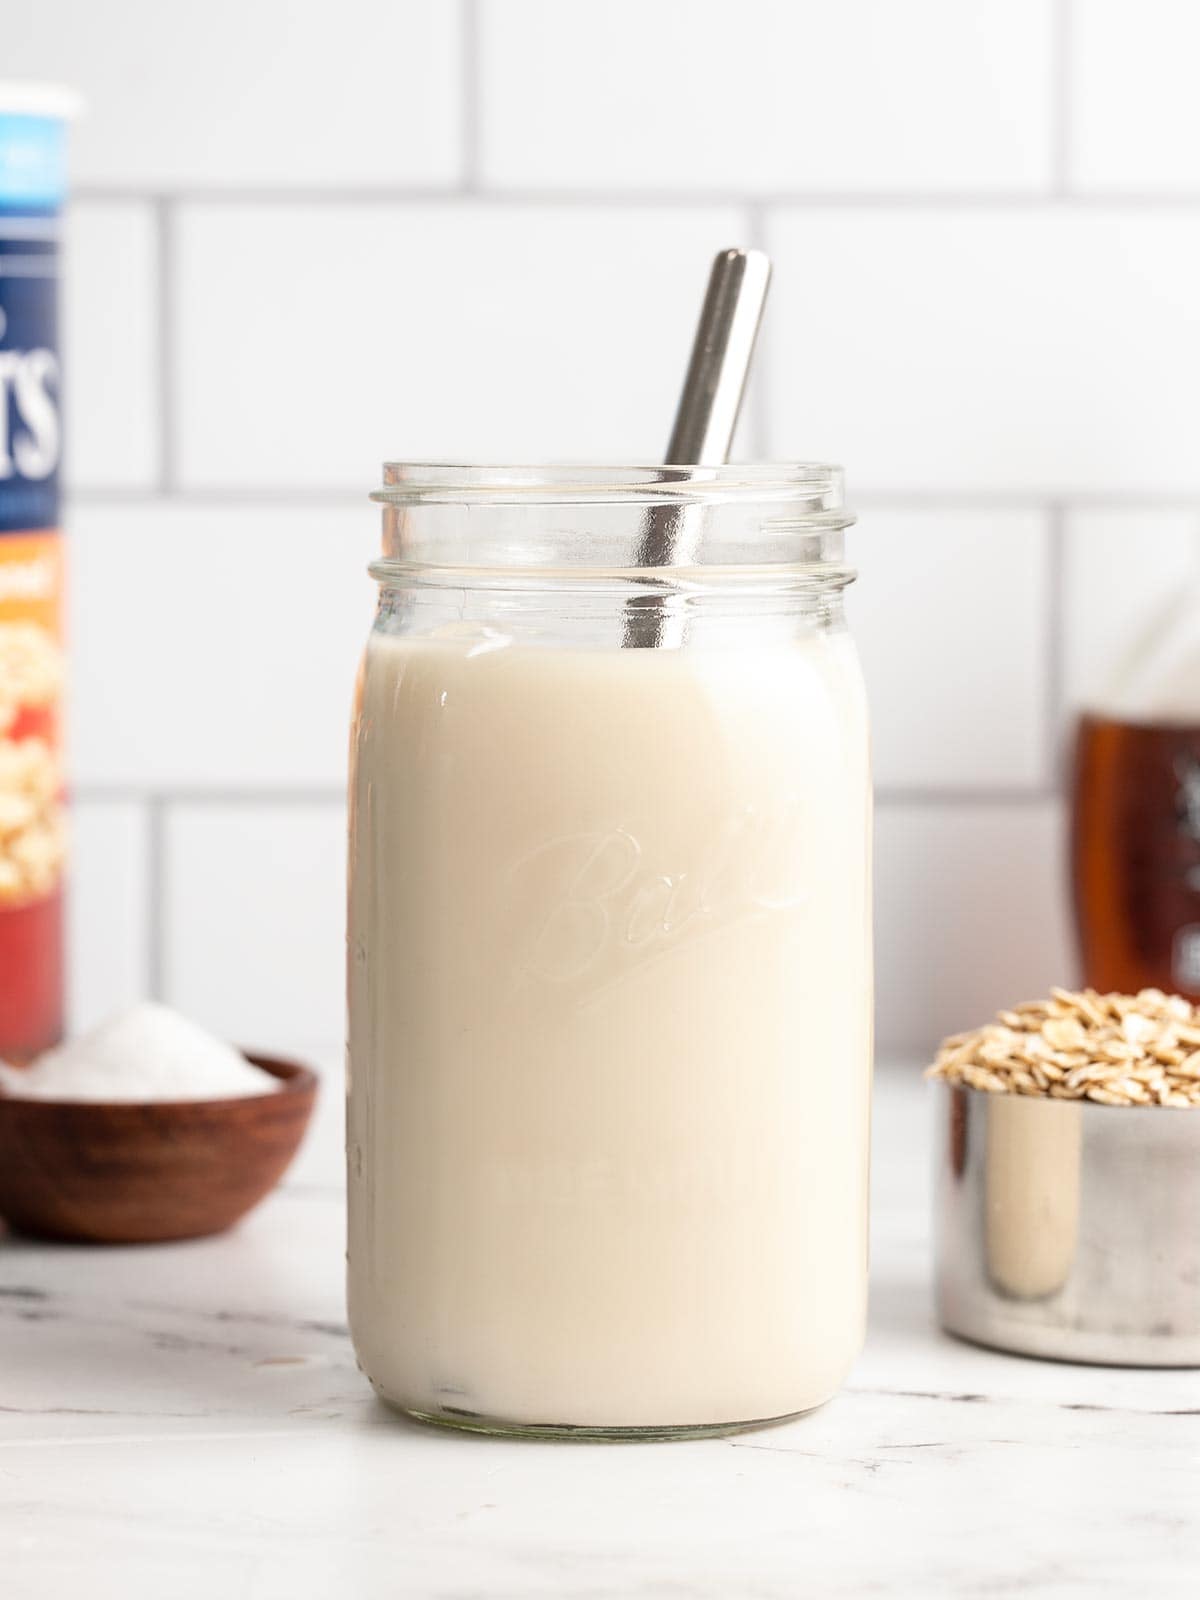 A jar of oat milk with a metal straw and ingredients in the background.